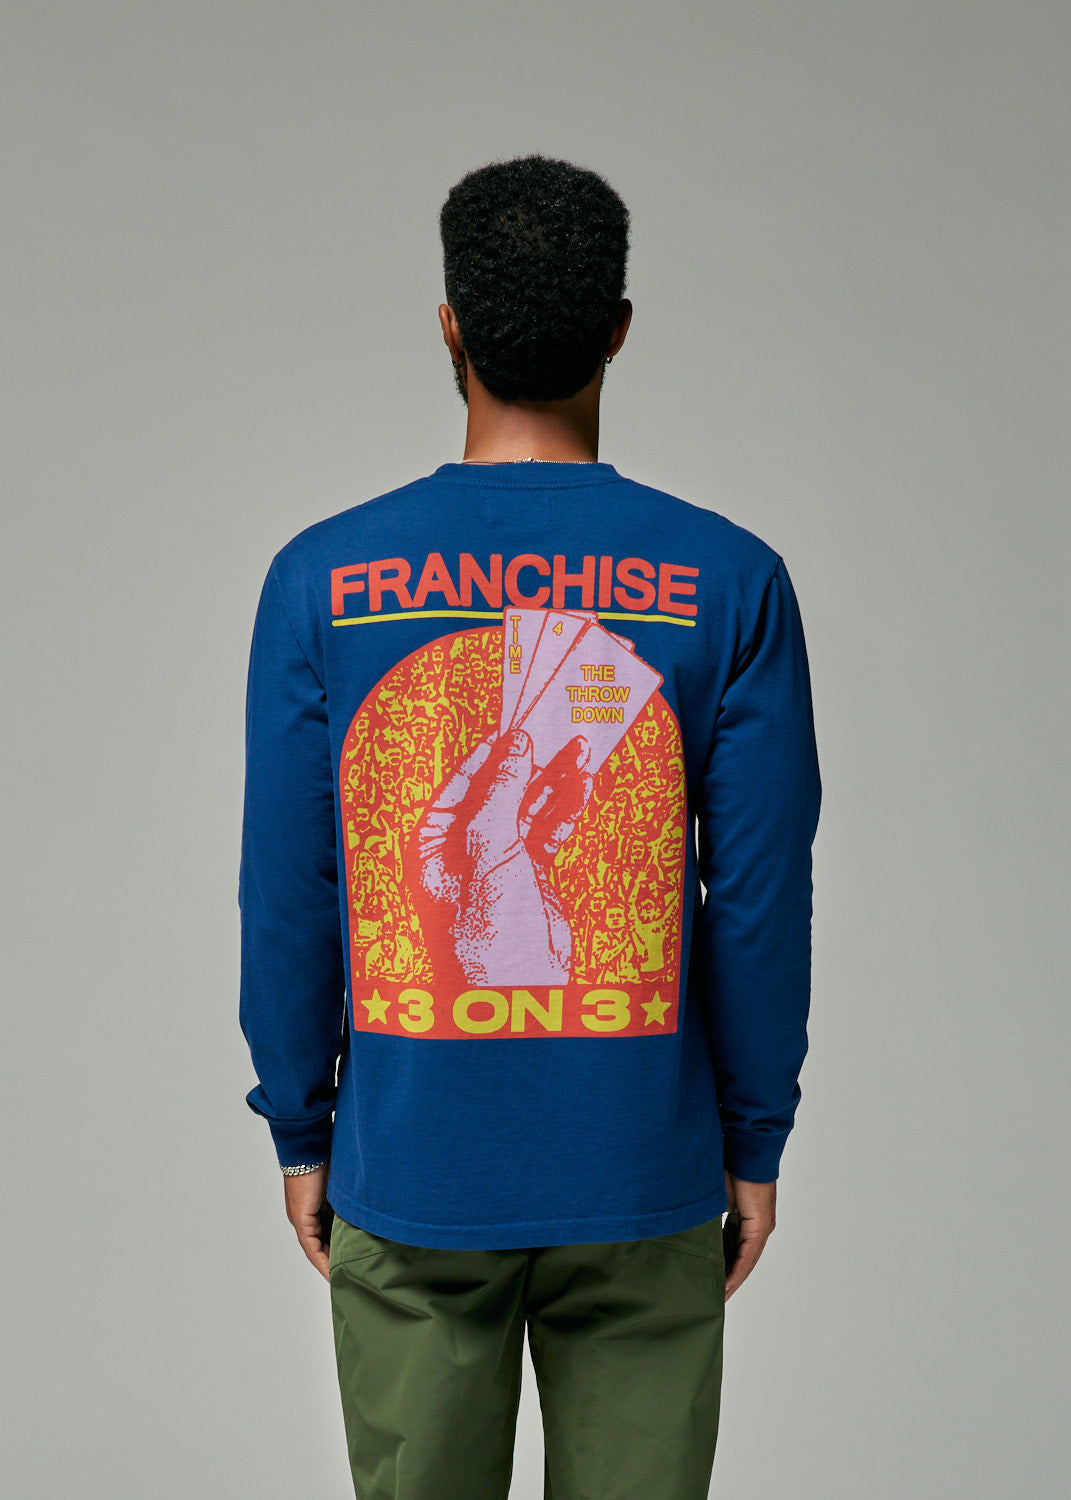 Franchise - Navy 3 on 3 Long Sleeve T-Shirt | 1032 SPACE